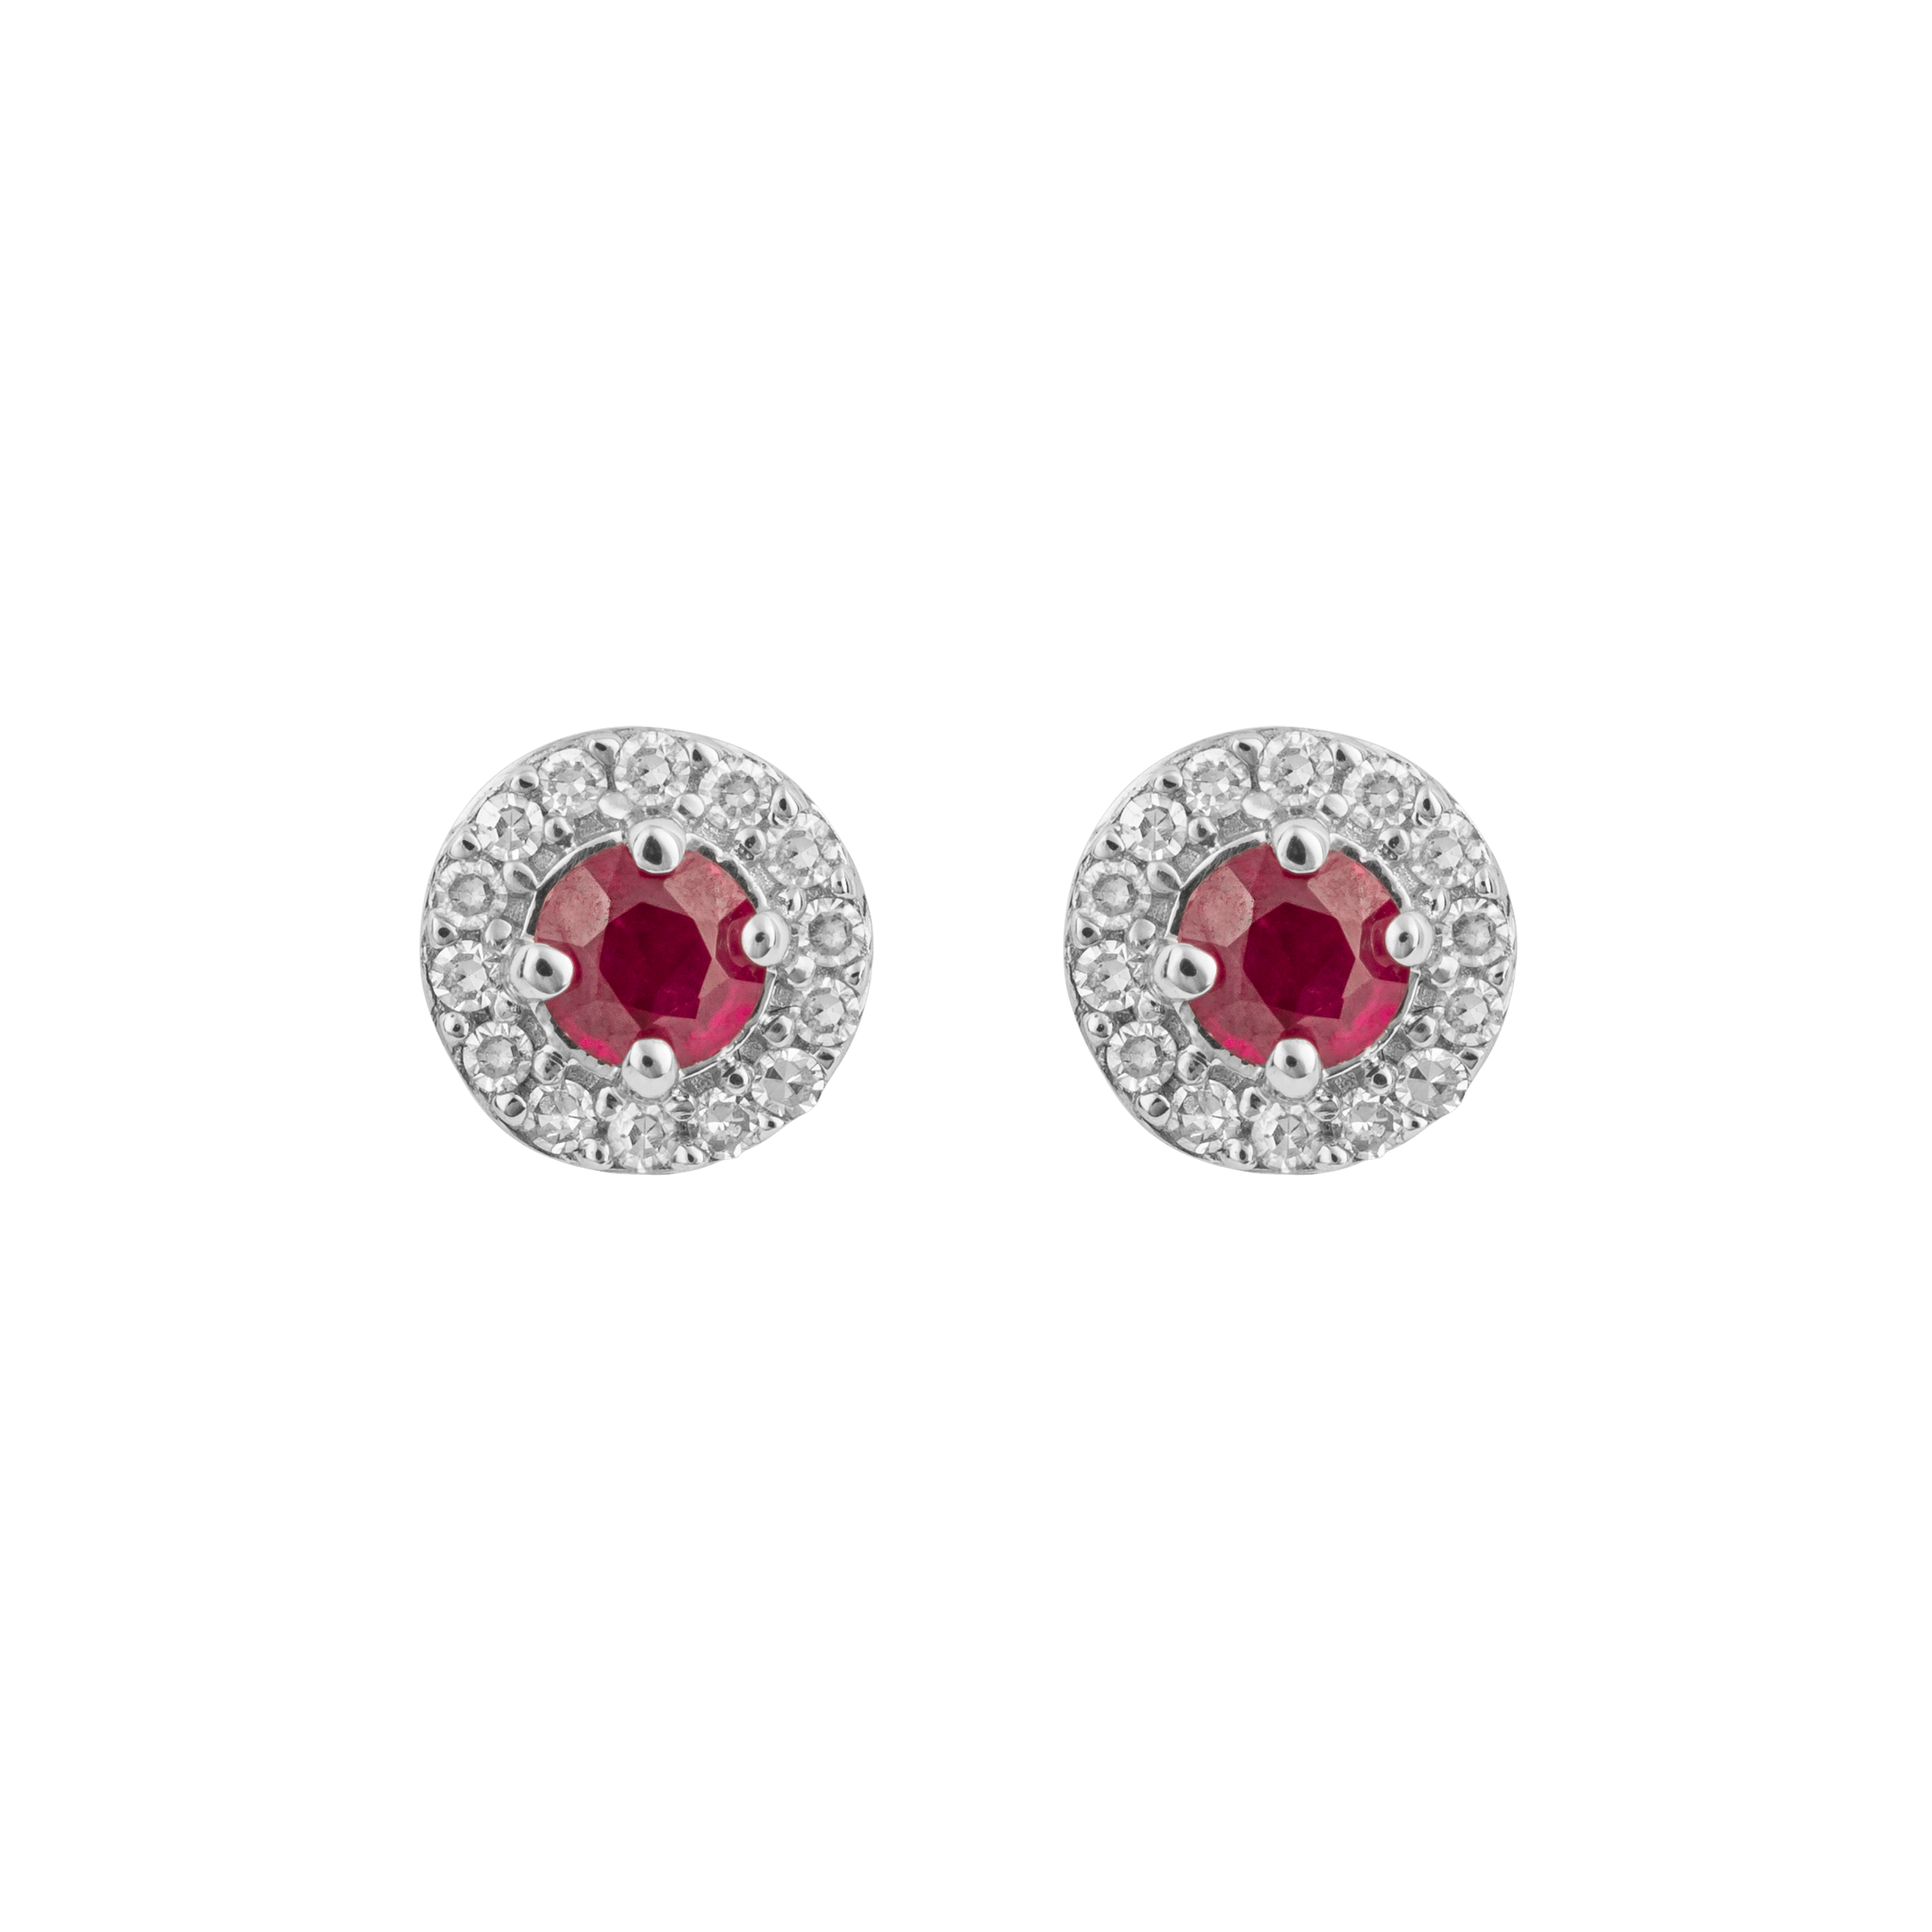 Round Ruby Stud Earrings with Diamond Surround in 9ct White Gold - Robert Anthony Jewellers, Edinburgh